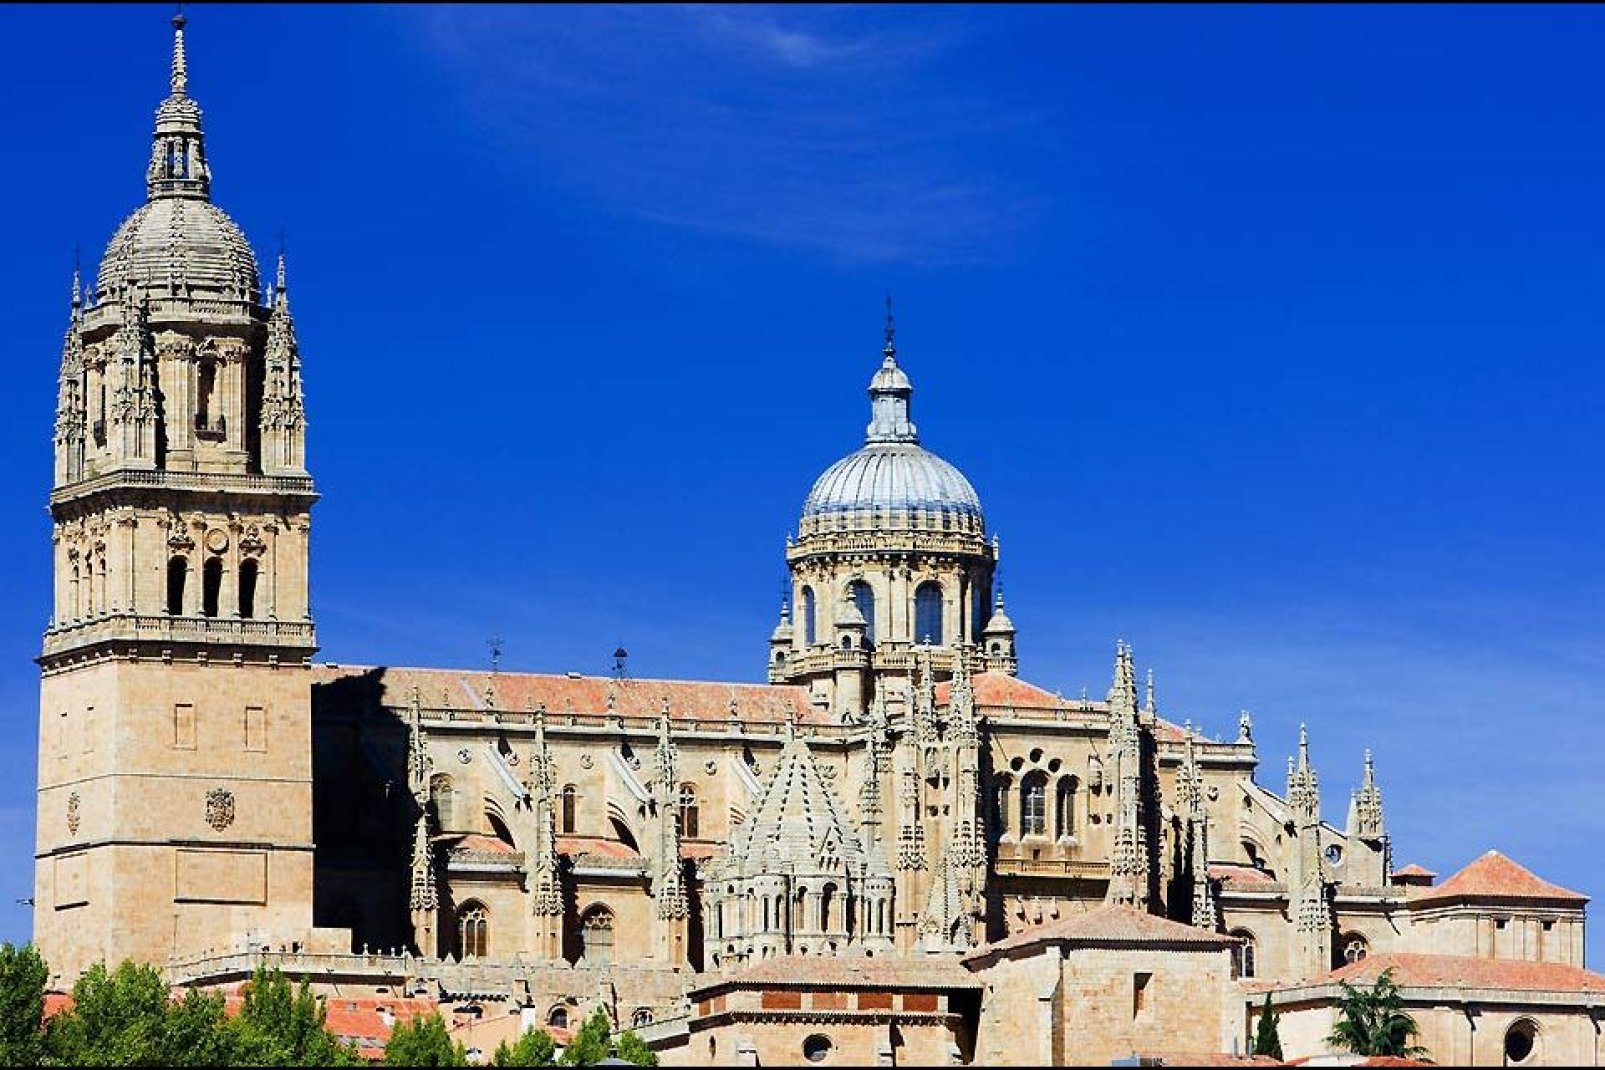 There are two cathedrals standing side by side: The "old" one dating from the 12th century and the "new" one built in the 16th century.